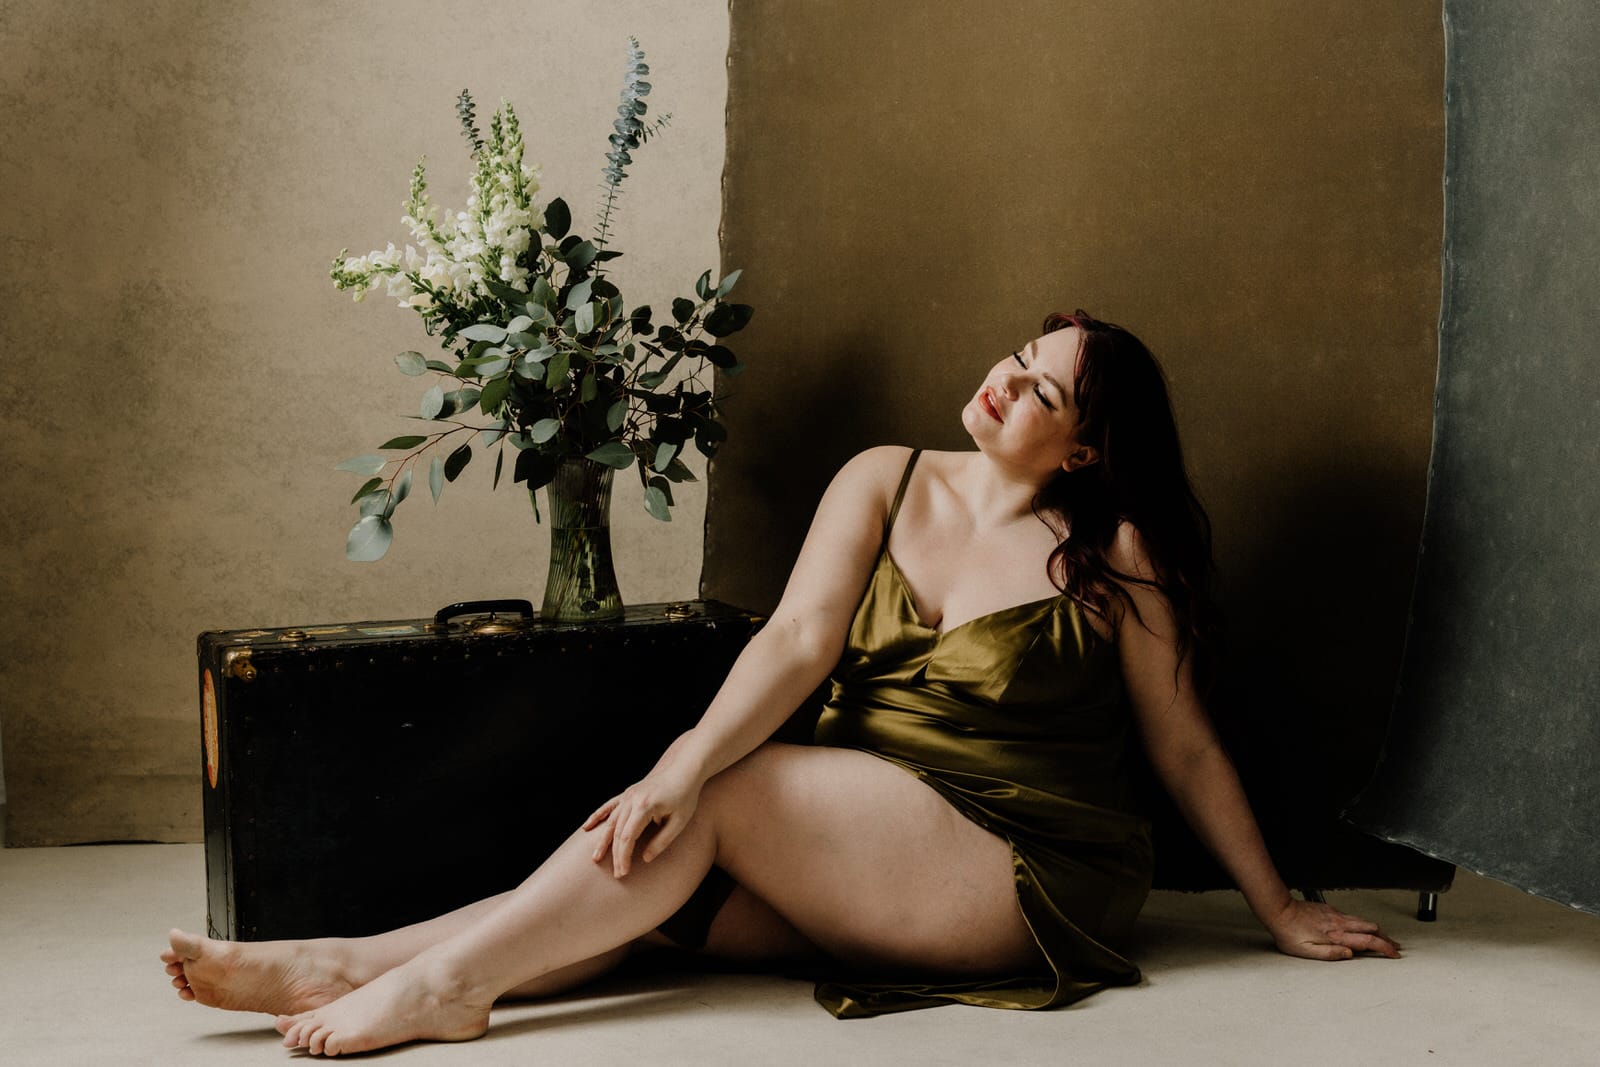 Plus size boudoir photo of a woman sitting on the floor and a vase of flowers